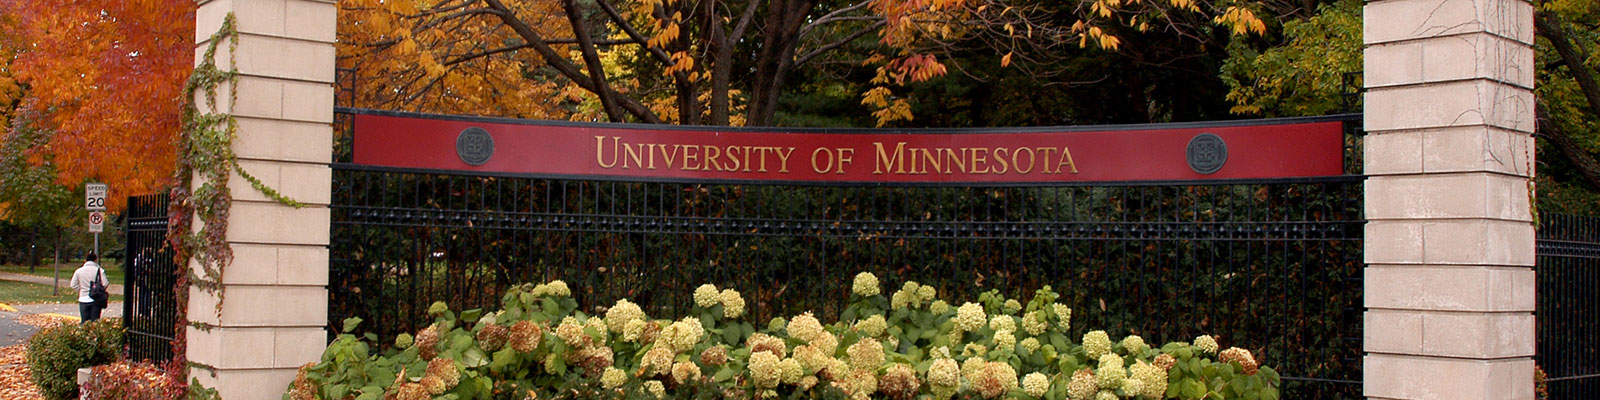 Sign at entrance to campus that says University of Minnesota surrounded by flowers